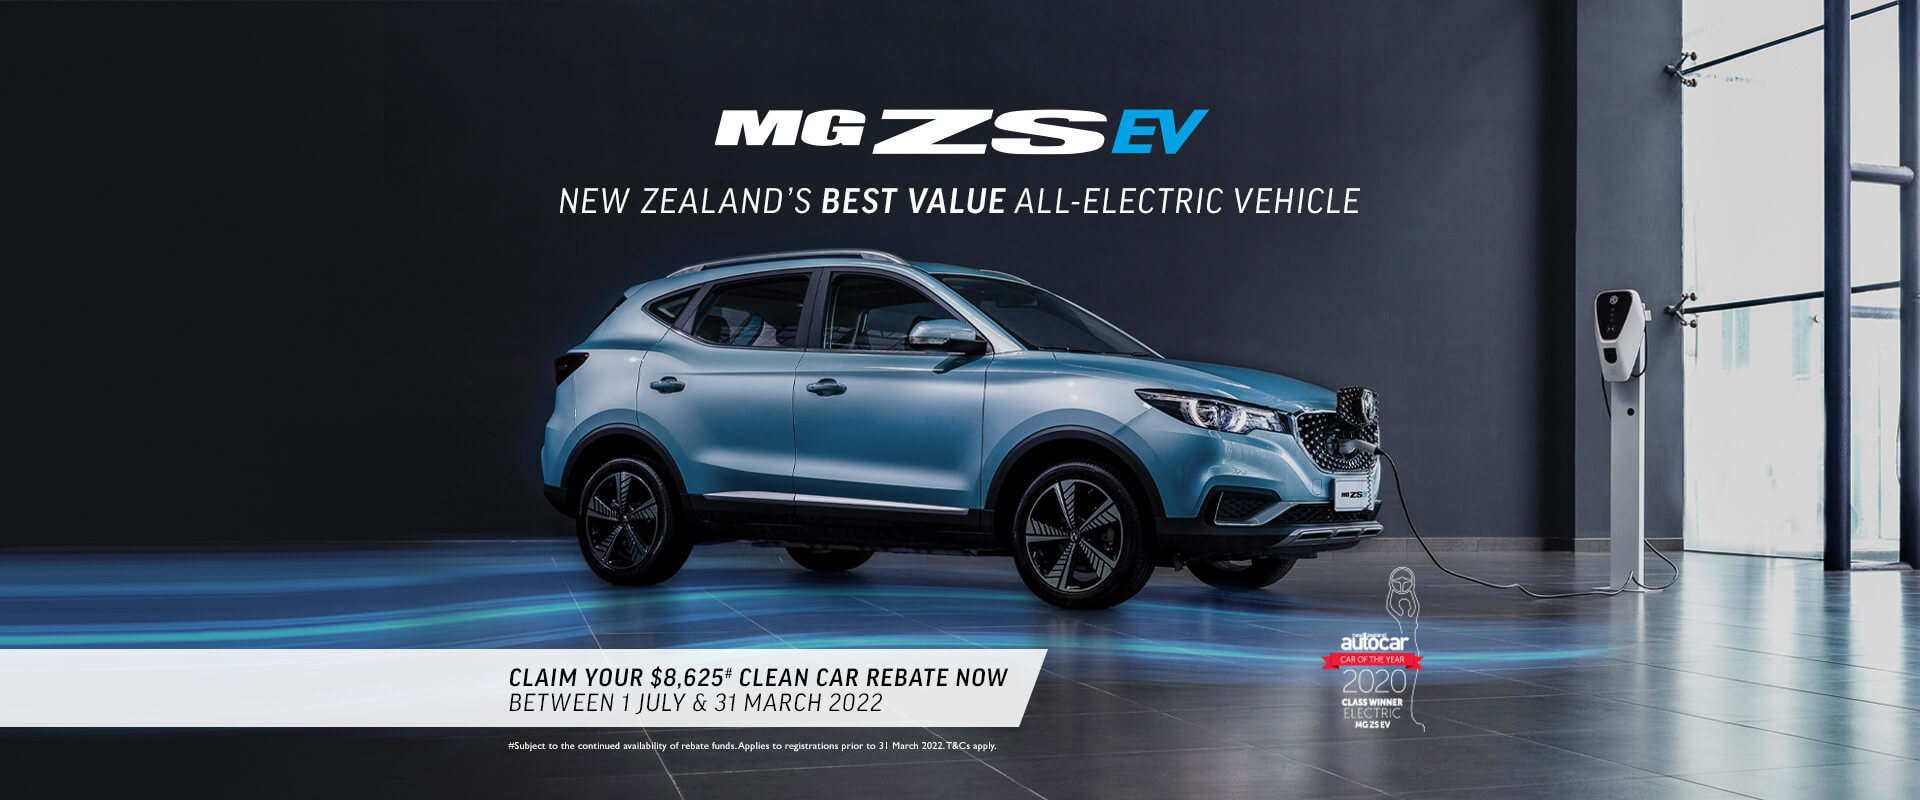 MG ZS EV. Claim your $8,625# Clean Car Rebate now*